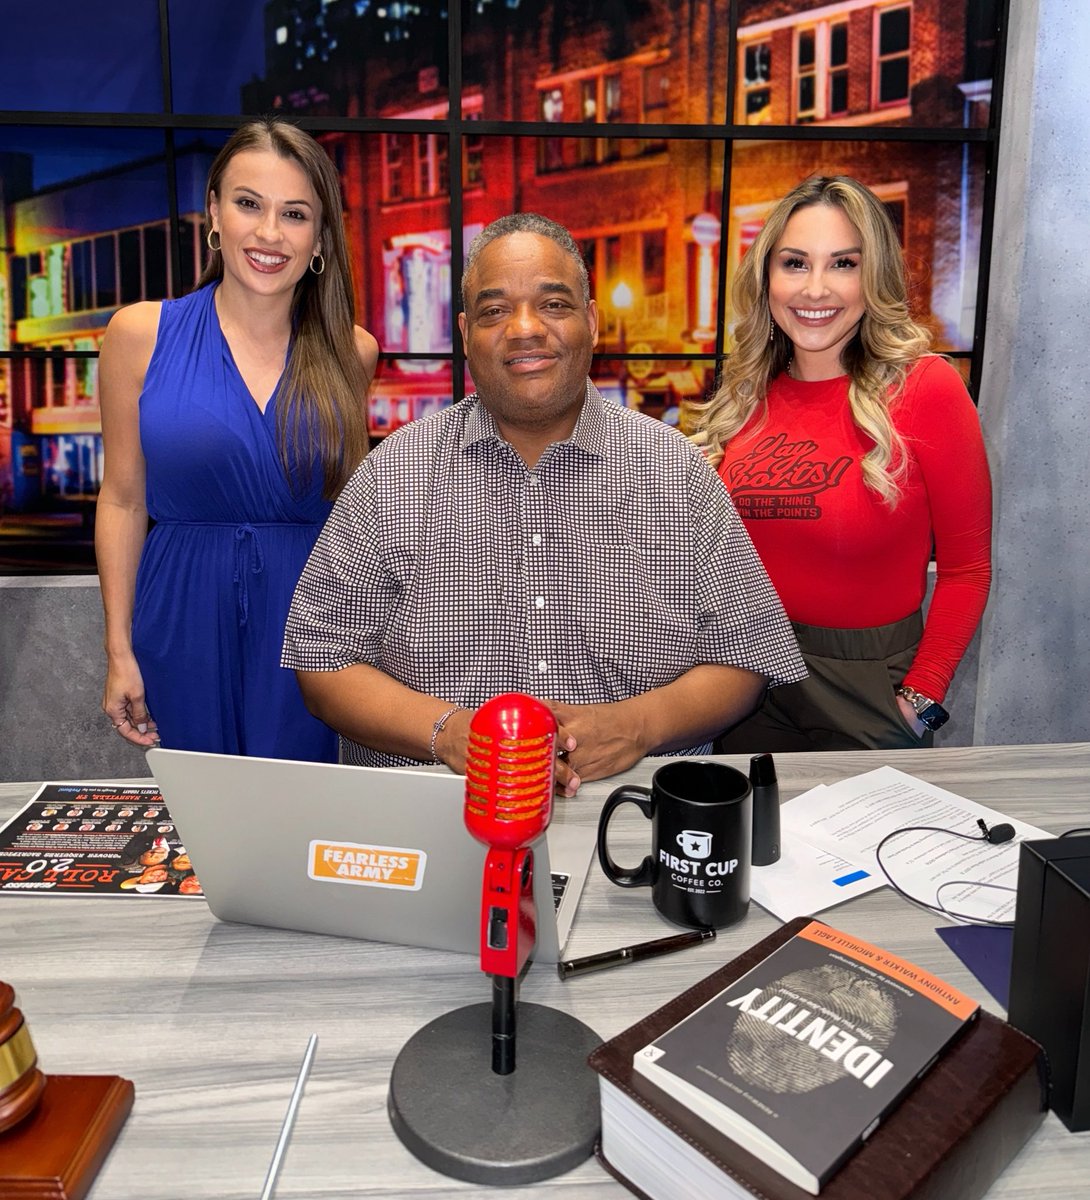 The best part about being in Nashville?! Jumping on @WhitlockJason’s show and hanging with the lovely @littlemissjacob & @ShemekaMichelle (remotely 😉)!